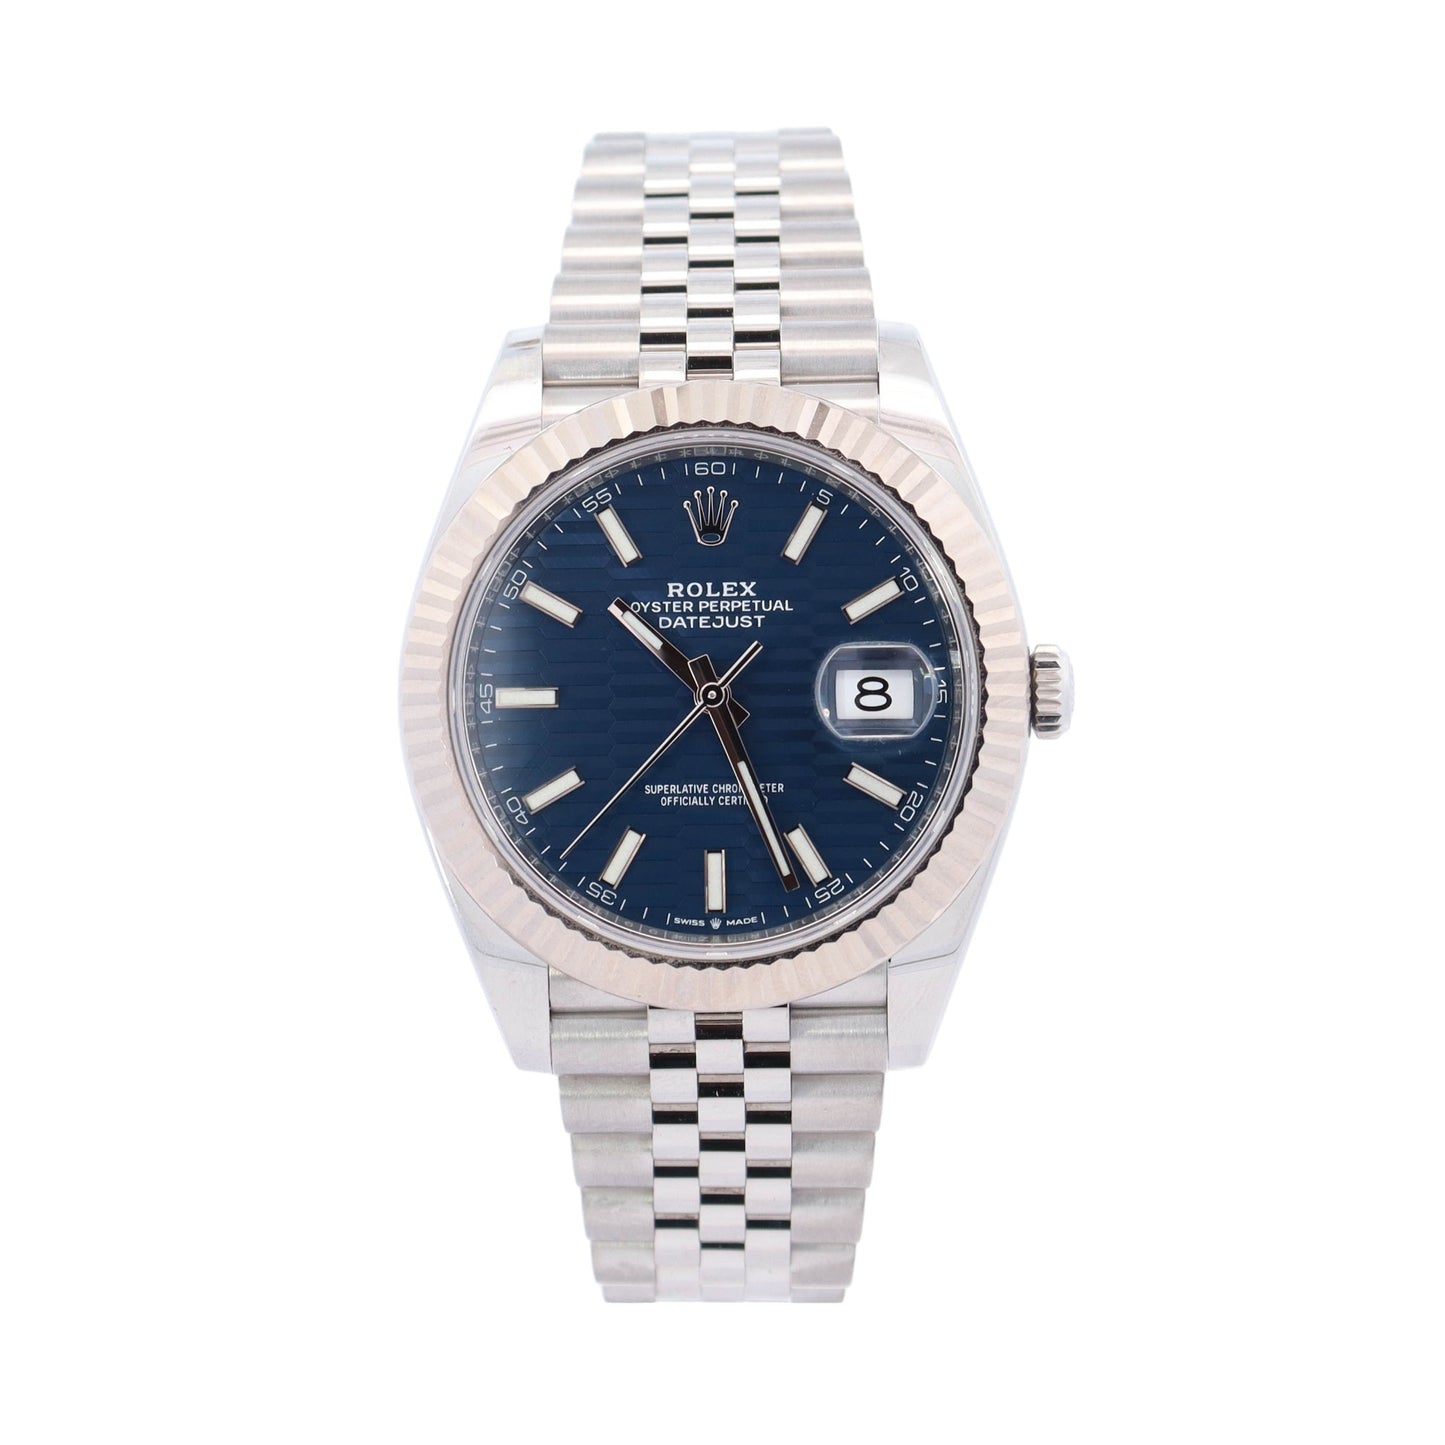 Rolex Datejust Stainless Steel 41mm Blue Motif Stick Dial Watch Reference #: 126334